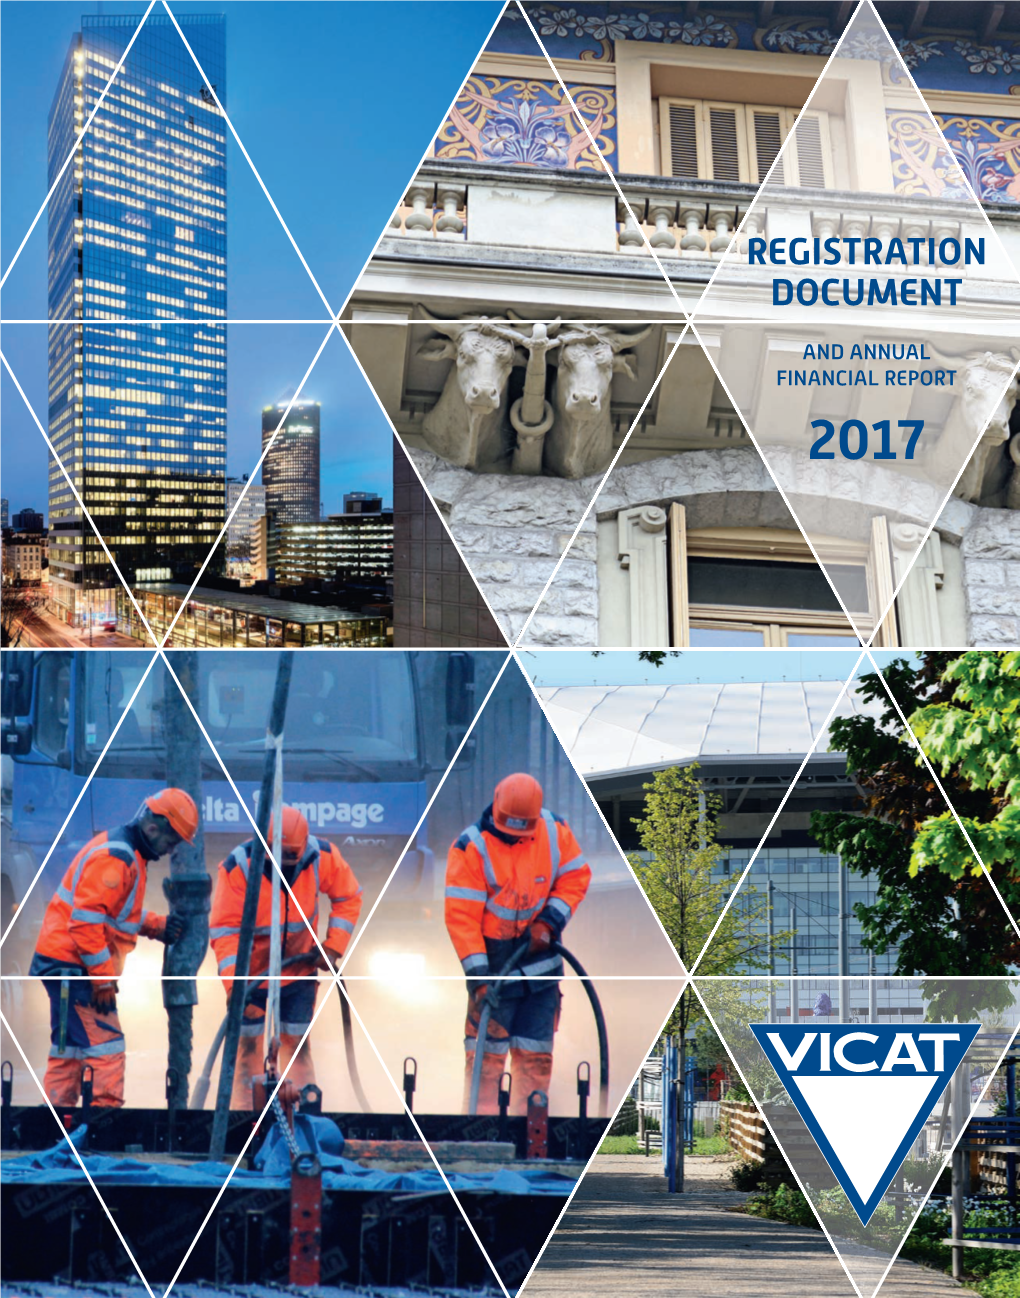 Registration Document and Financial Annual Report 2017 Vicat.Pdf